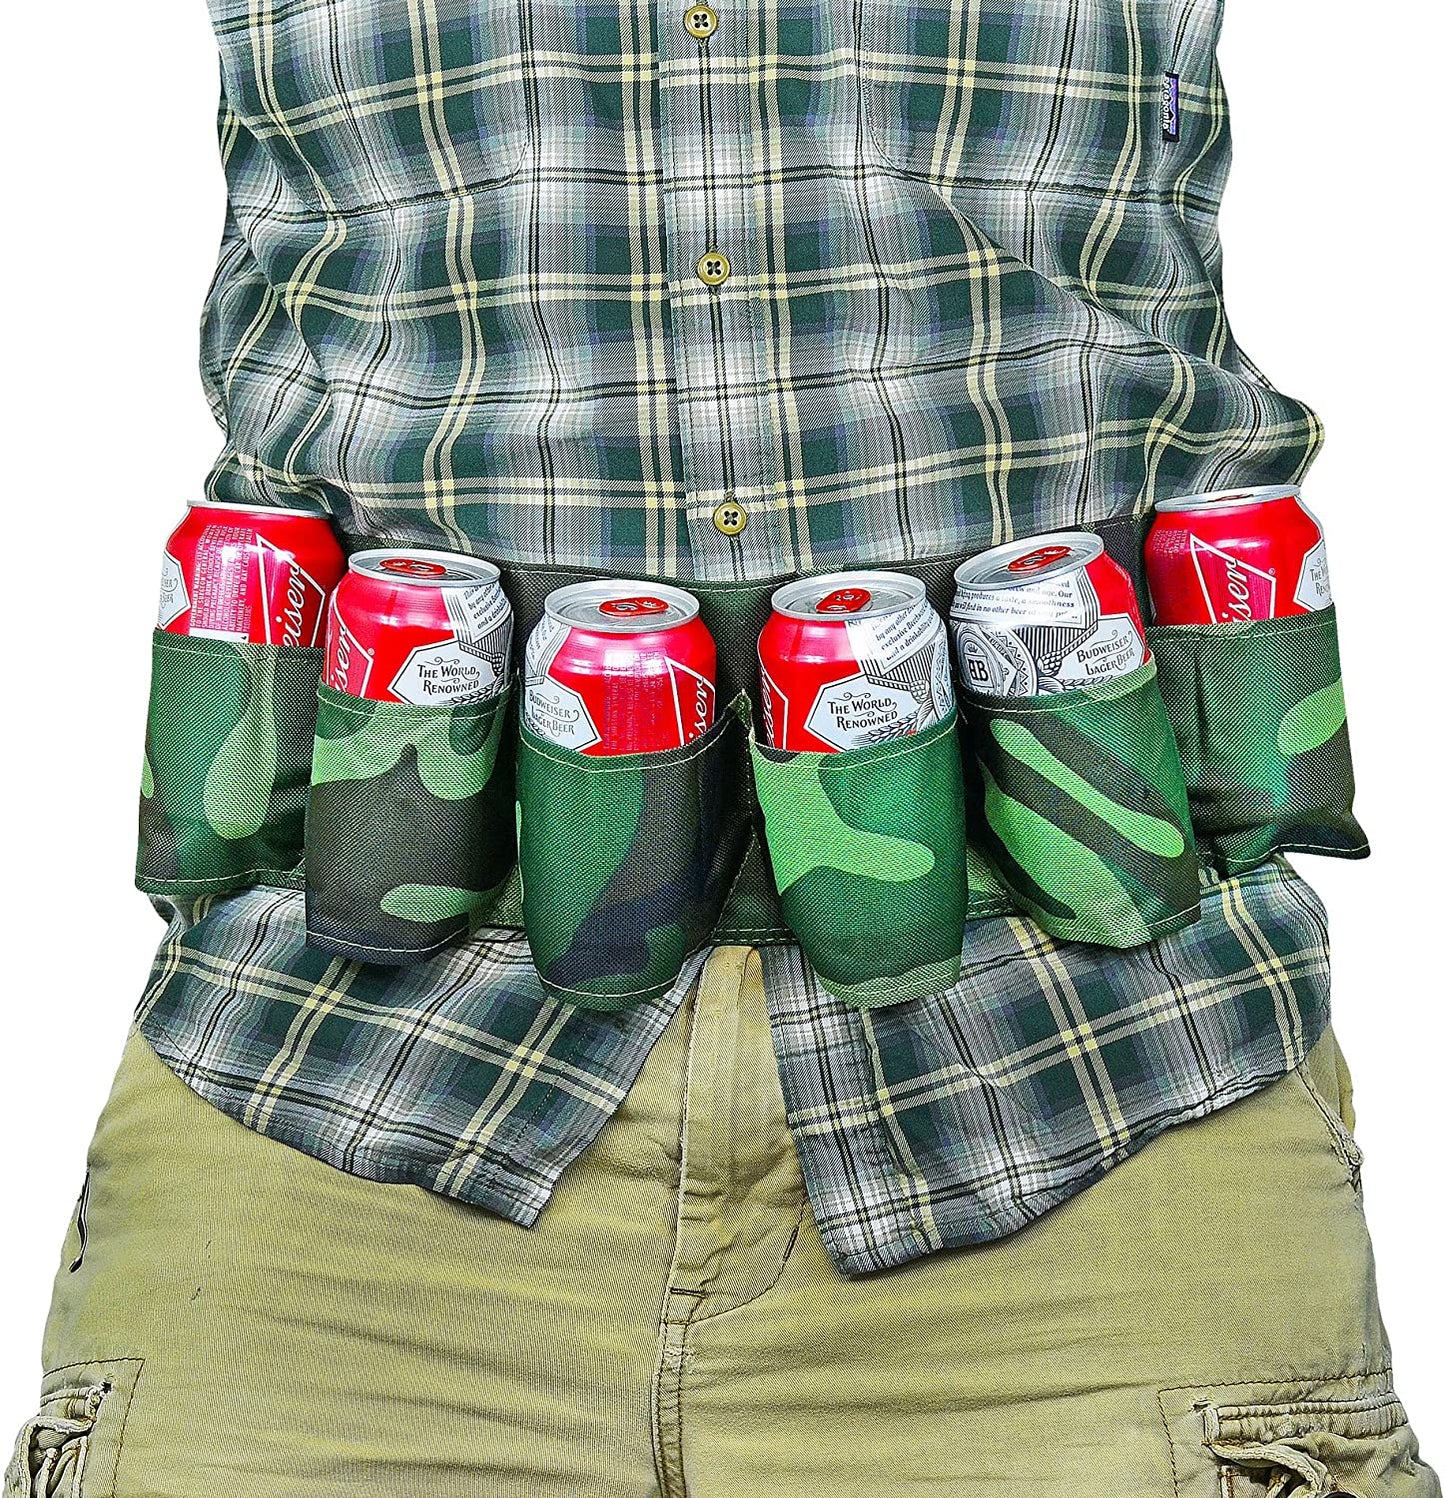 A camouflage colored beer belt is around a persons waist. The belt is designed for parties and to hold up to 6 cans of drink.